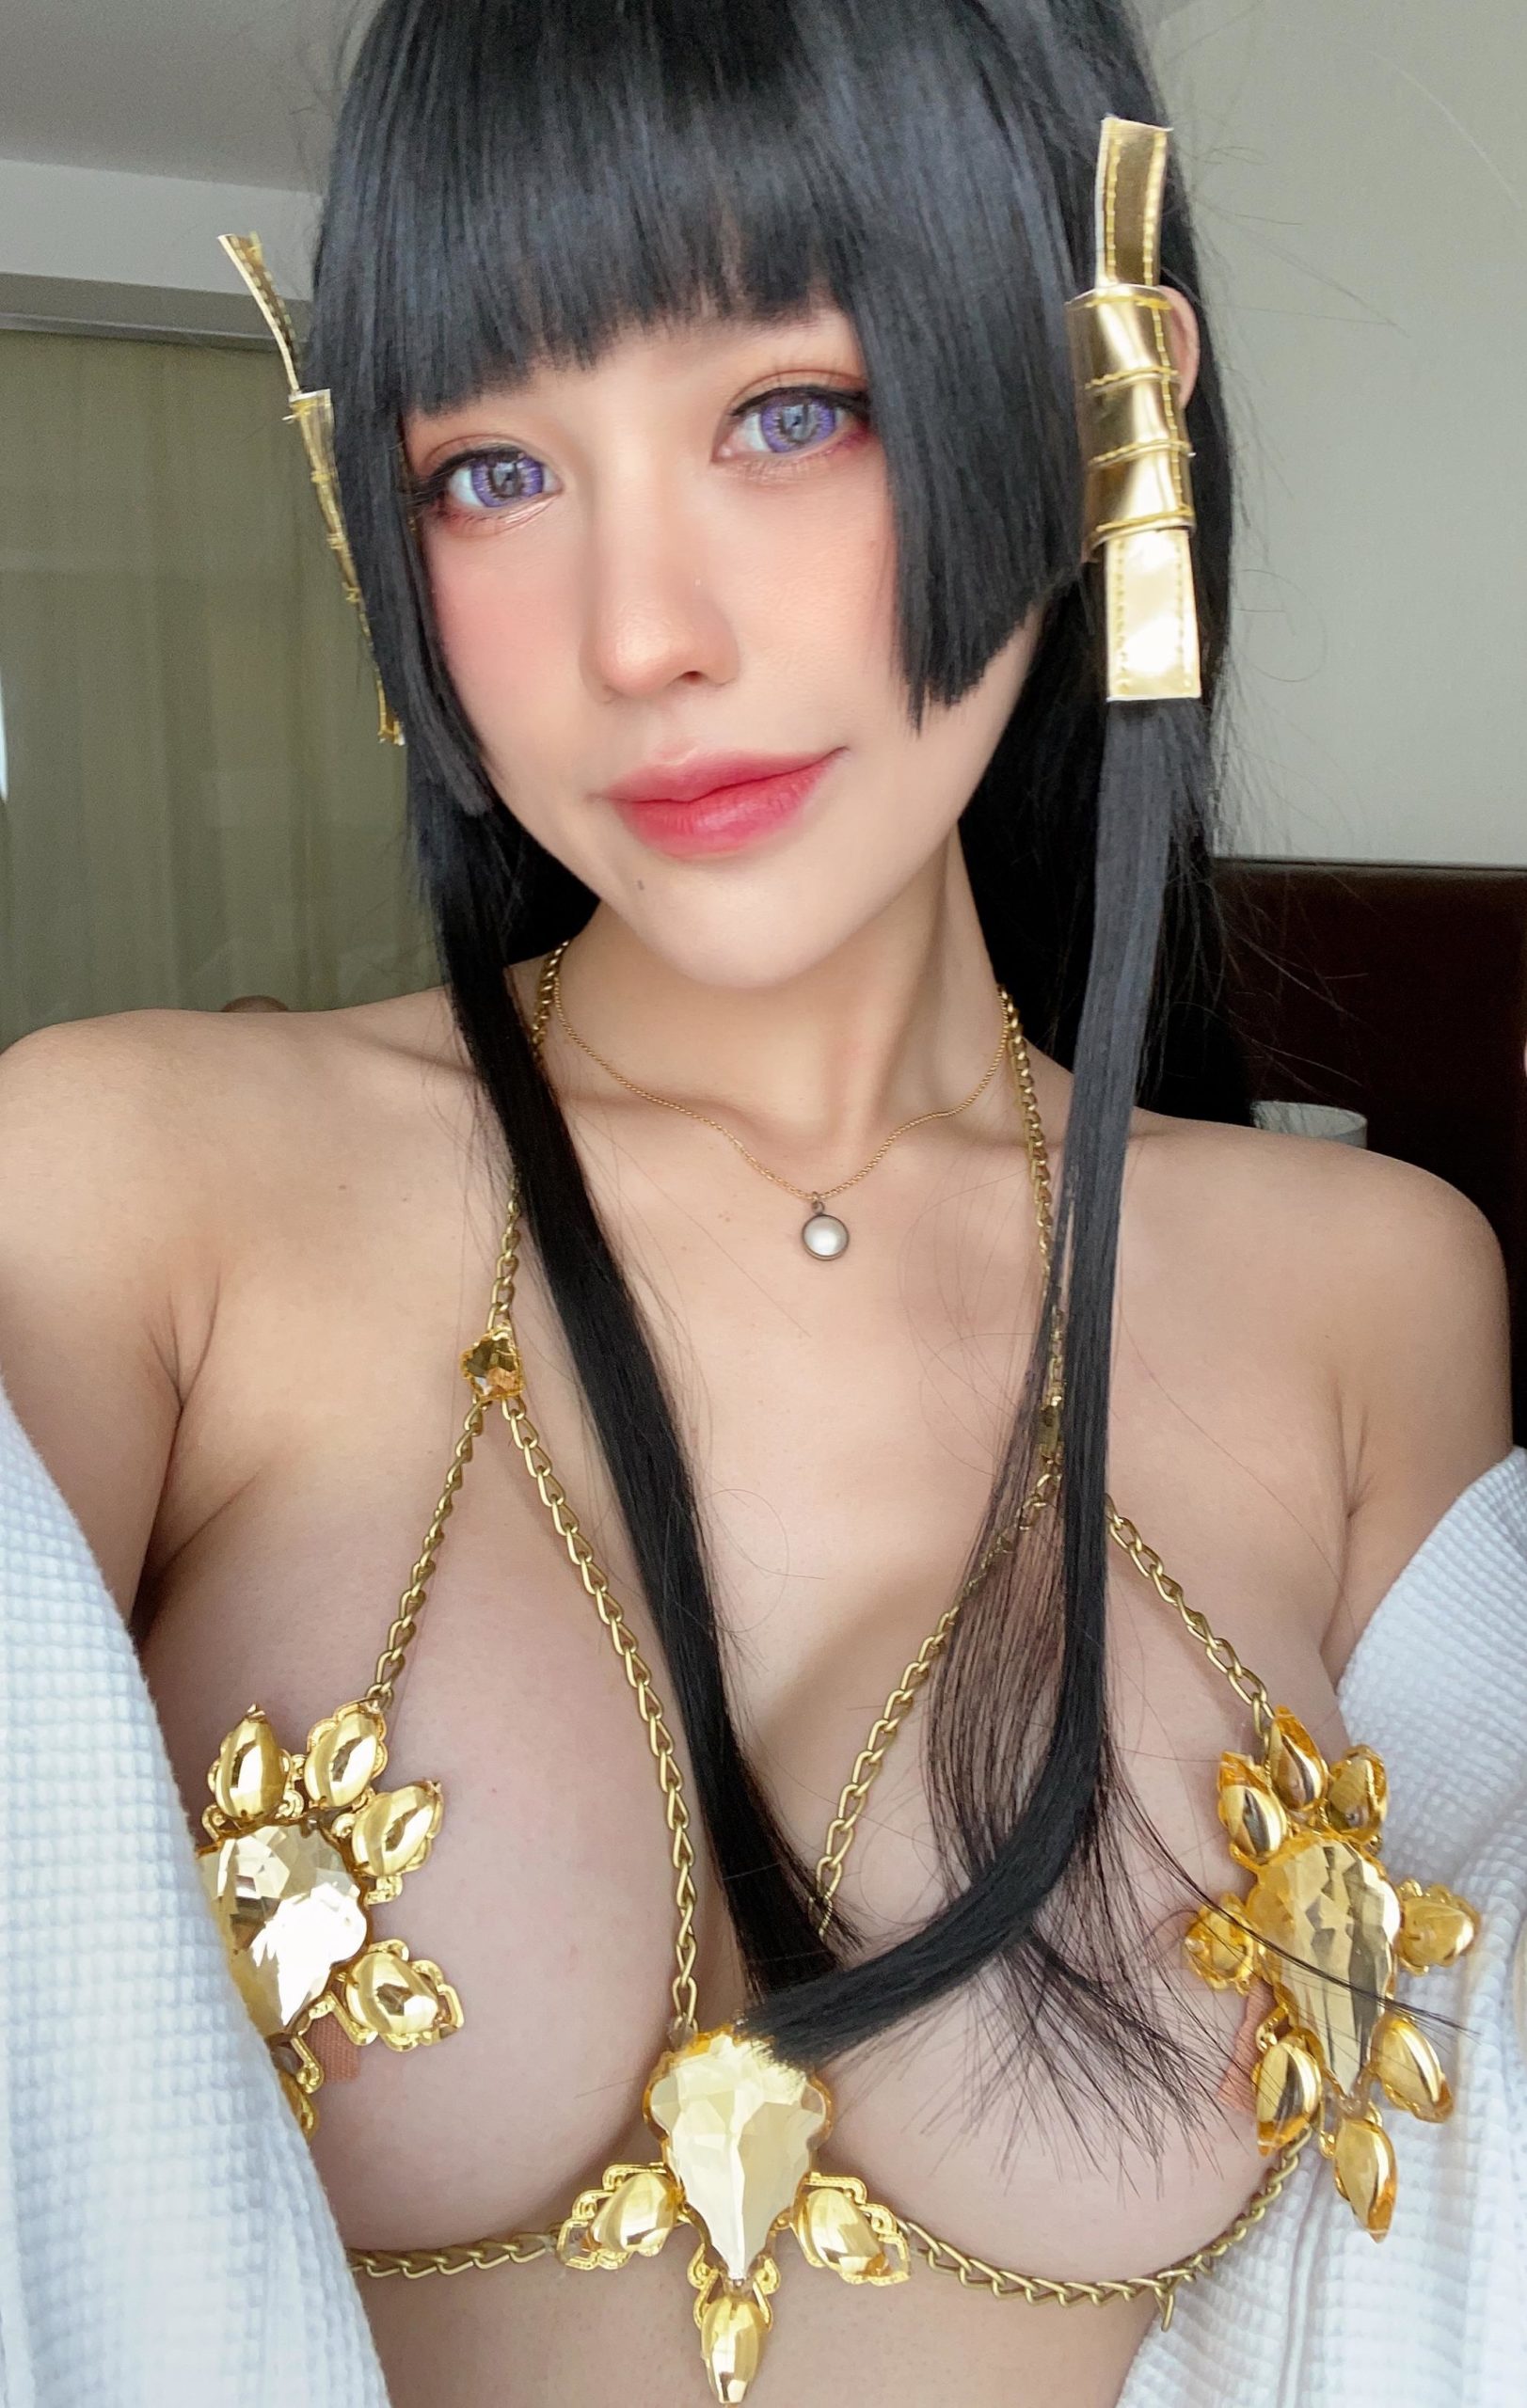 DeadorAlive Nyotengu Cosplay by PingPing 2022 41 scaled 1